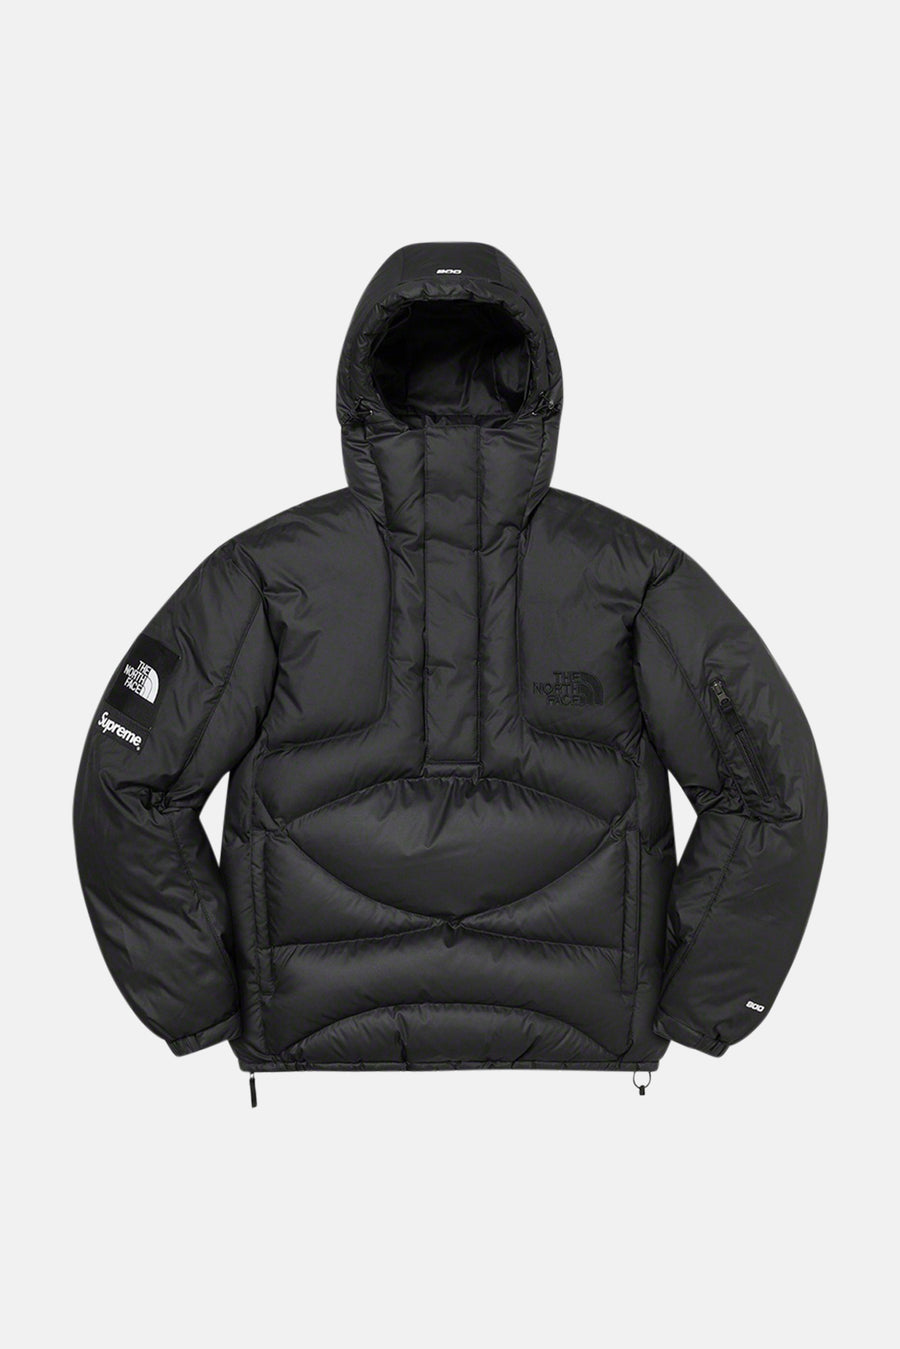 Supreme x The North Face Men's Wool Jacket